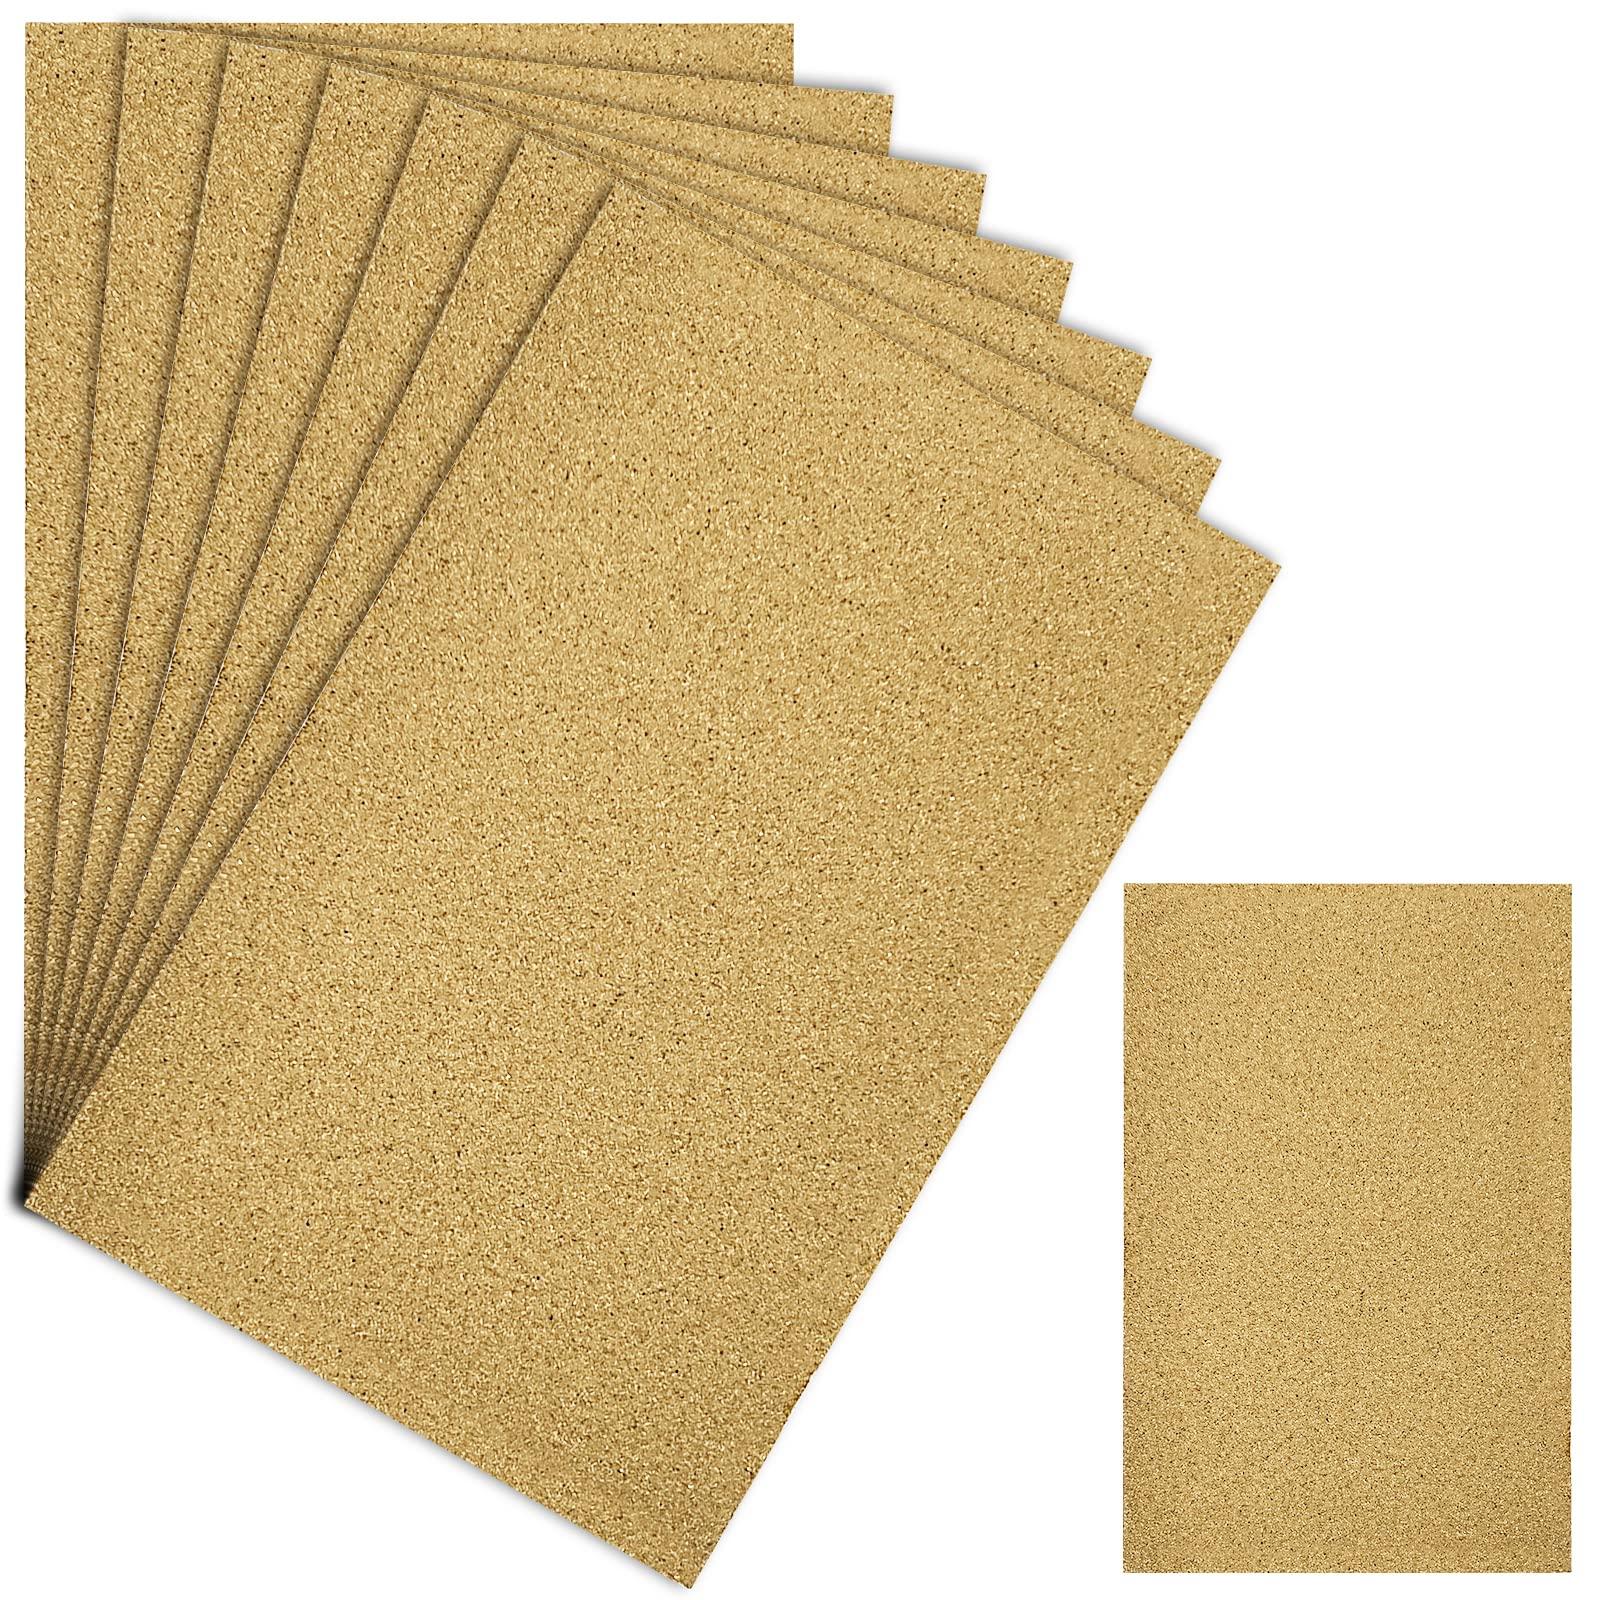 SX gravel Paper for Bird cage 10A x 16Agravel Liner Paper 7-Pack Sand Sheets Bird cage Liners cages Pick Your Size Bedding Paper in Sea Sand